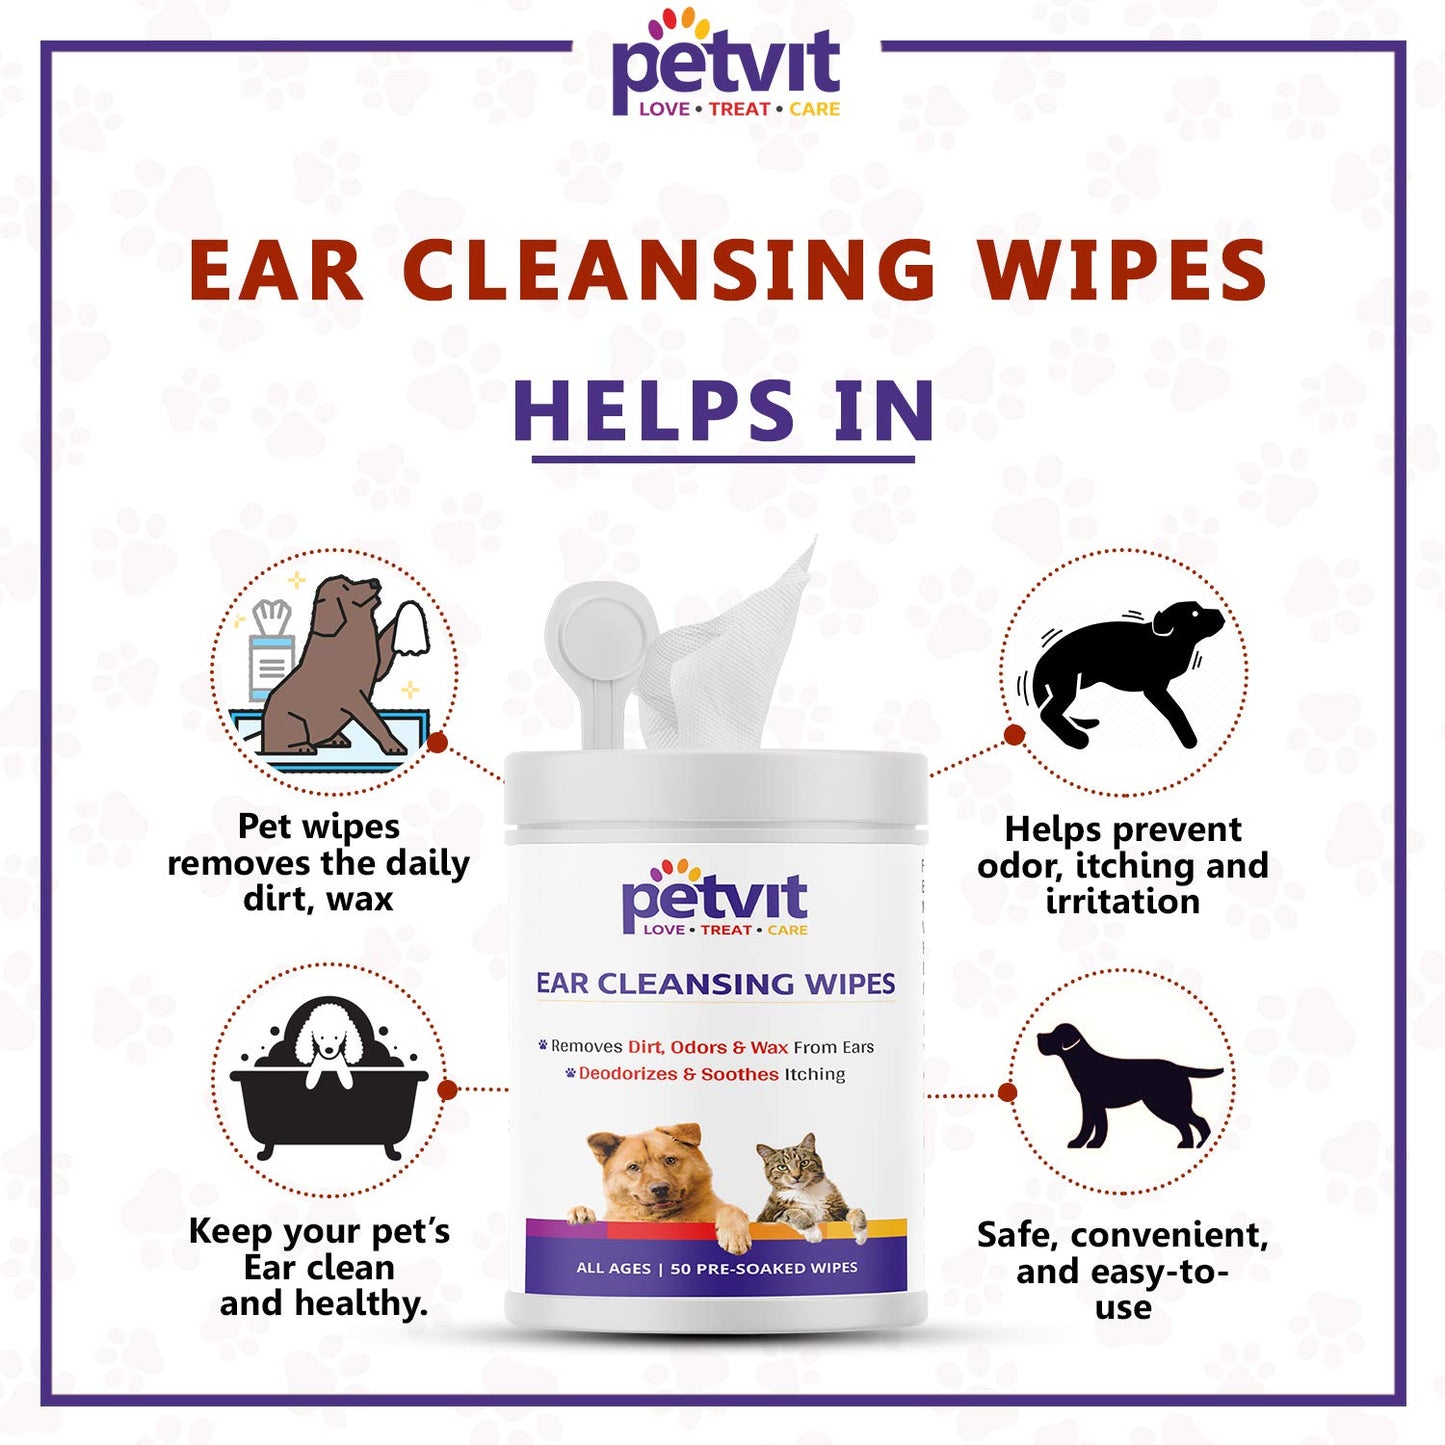 Petvit Dog Wipes for cleaning Ear  Wet Wipes for Dog - Cleans Ears  Face  Dog Wet Wipes for grooming  Pack of 1  50 Count